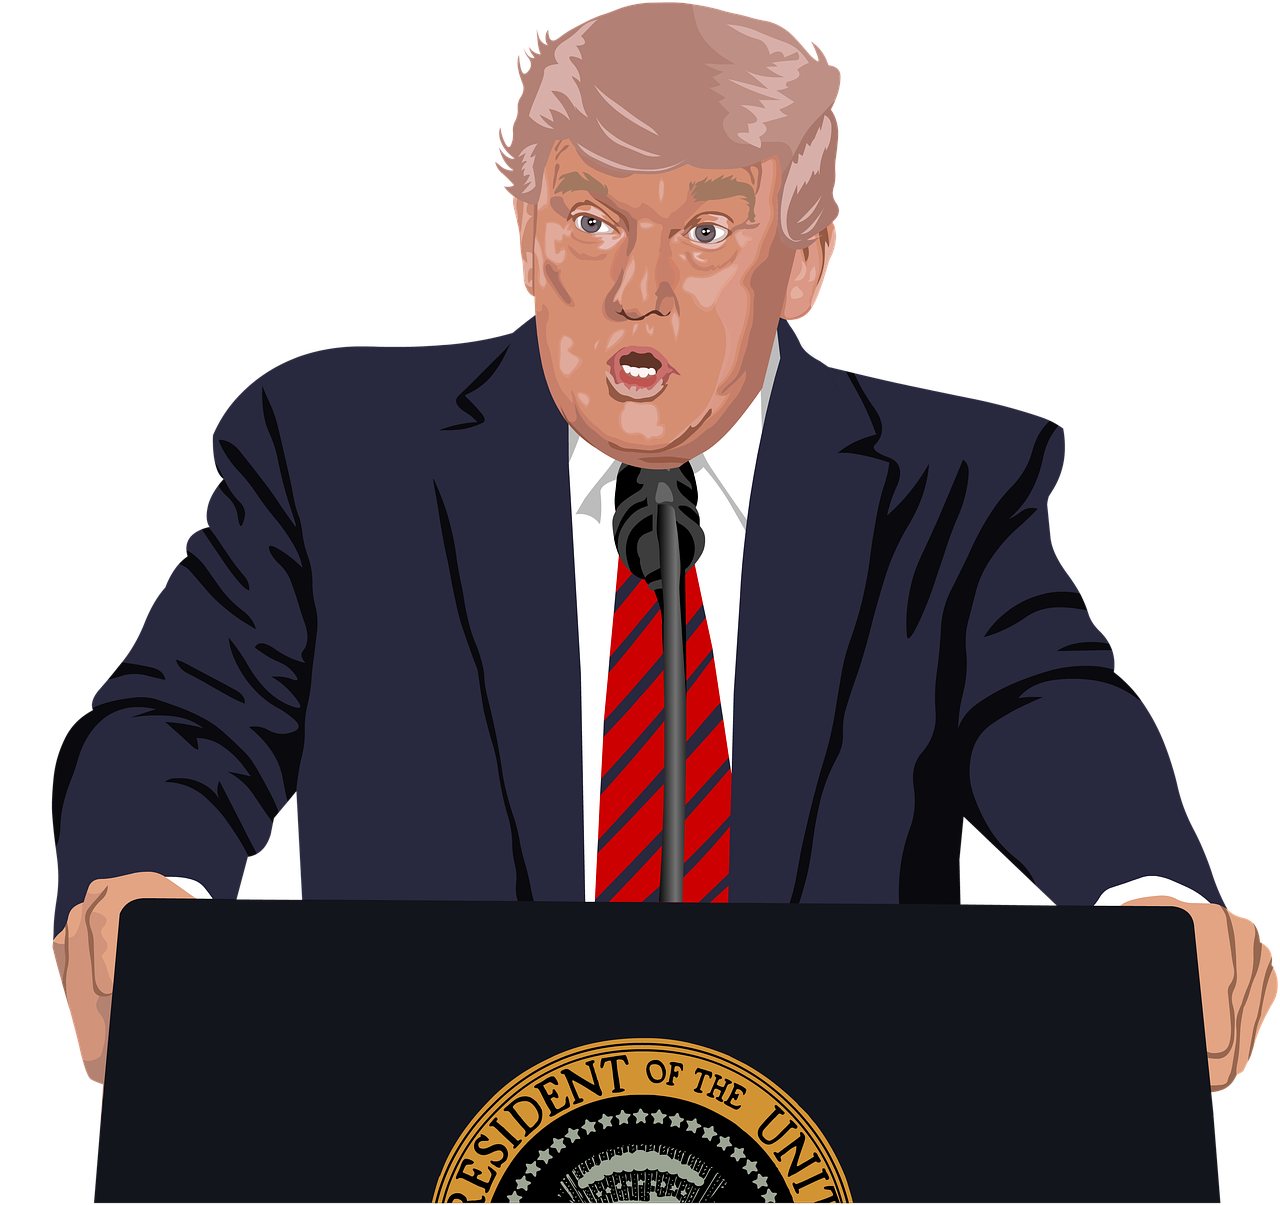 a man in a suit and tie standing behind a podium, a cartoon, by Tom Carapic, digital art, donald trumps sexy face, on a flat color black background, it is visibly angry at the tv, state of the union